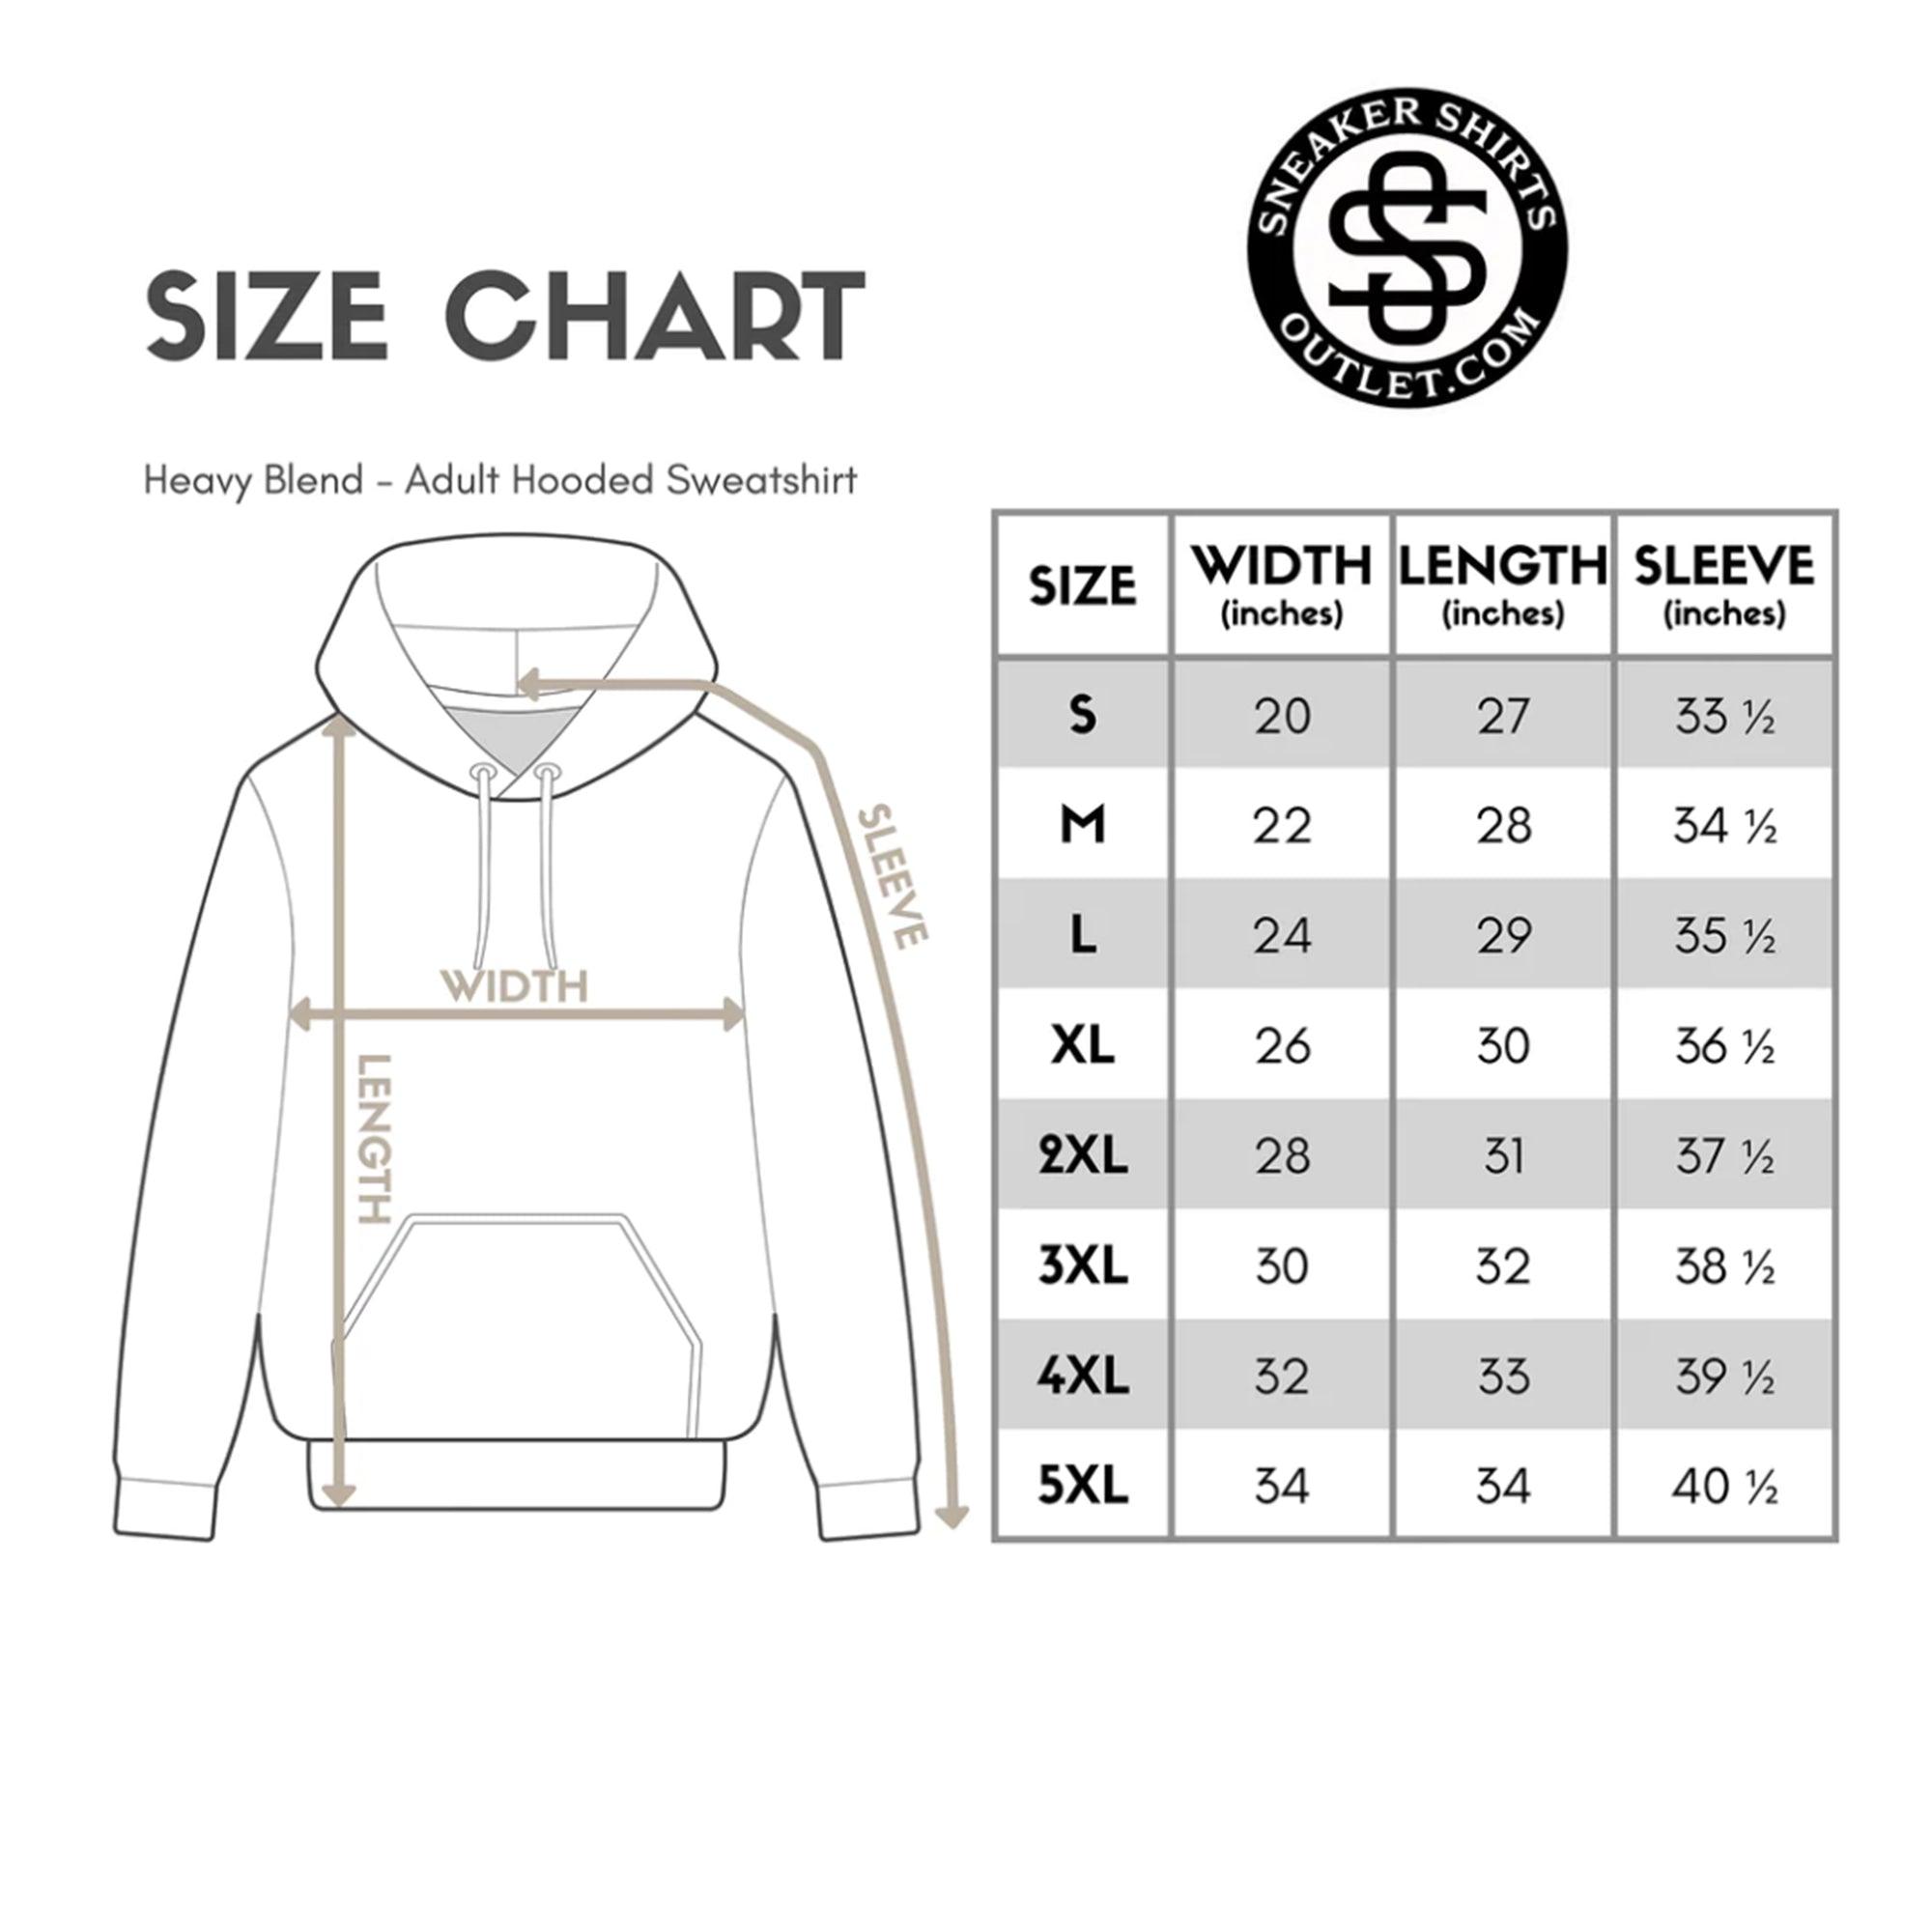 size chart Kick Game Crazy Hoodie Yeezy Boost 700s Bright Blue photo